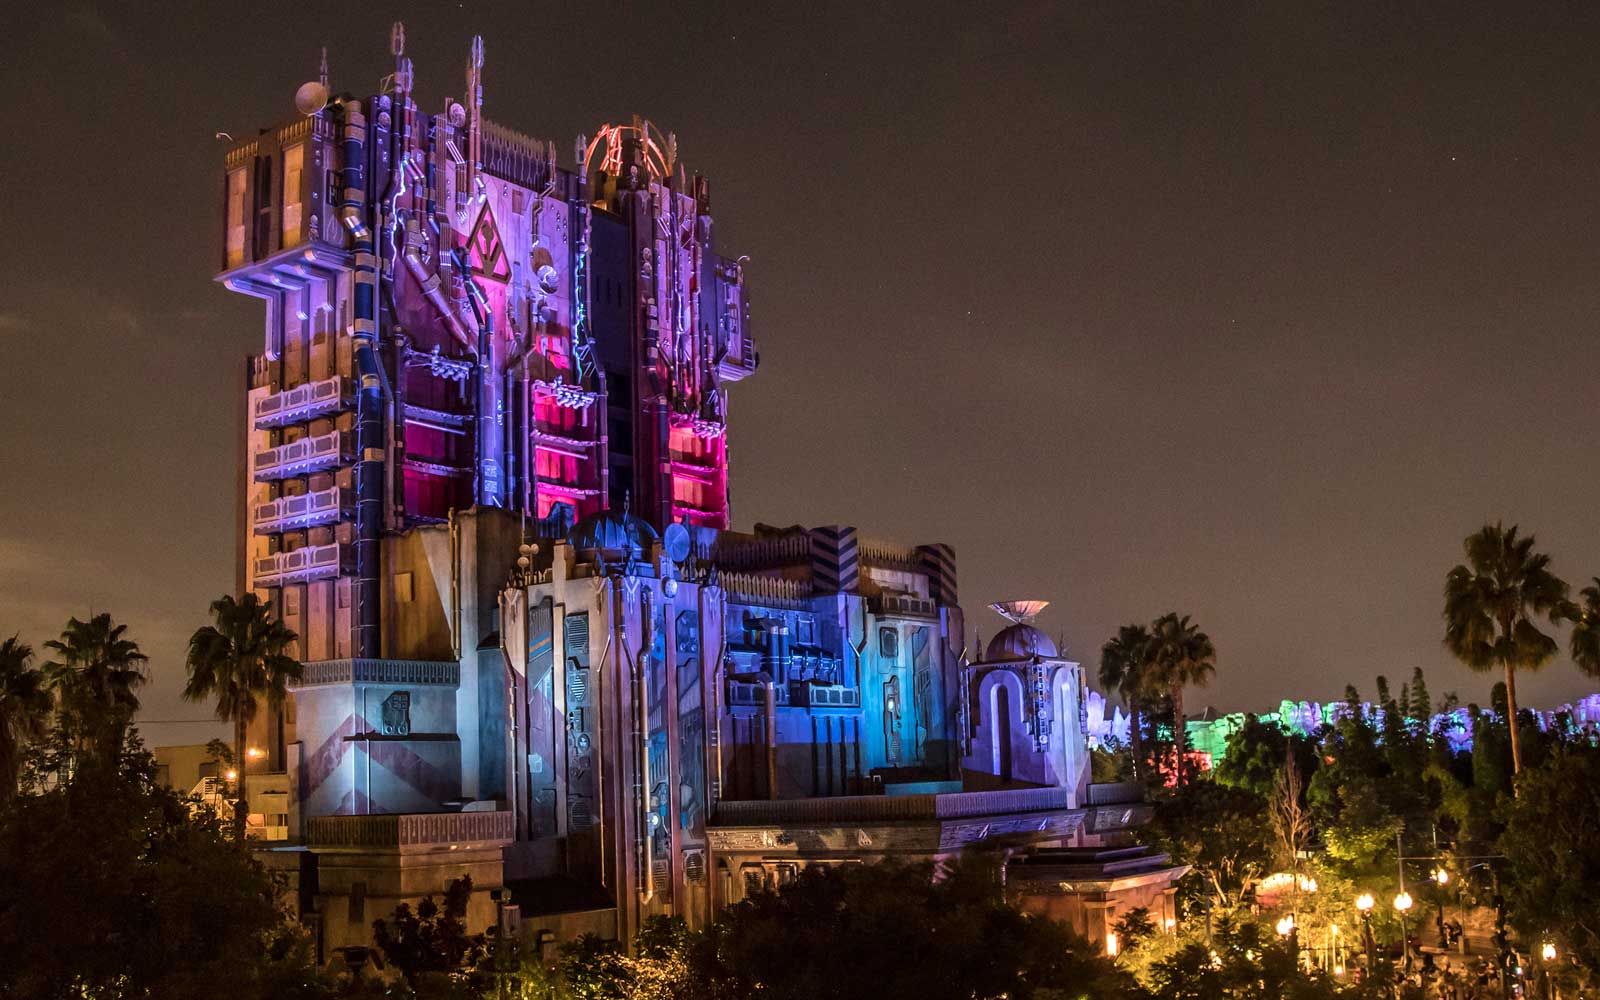 Disneyland Just Made Their Scariest Ride Even More Terrifying